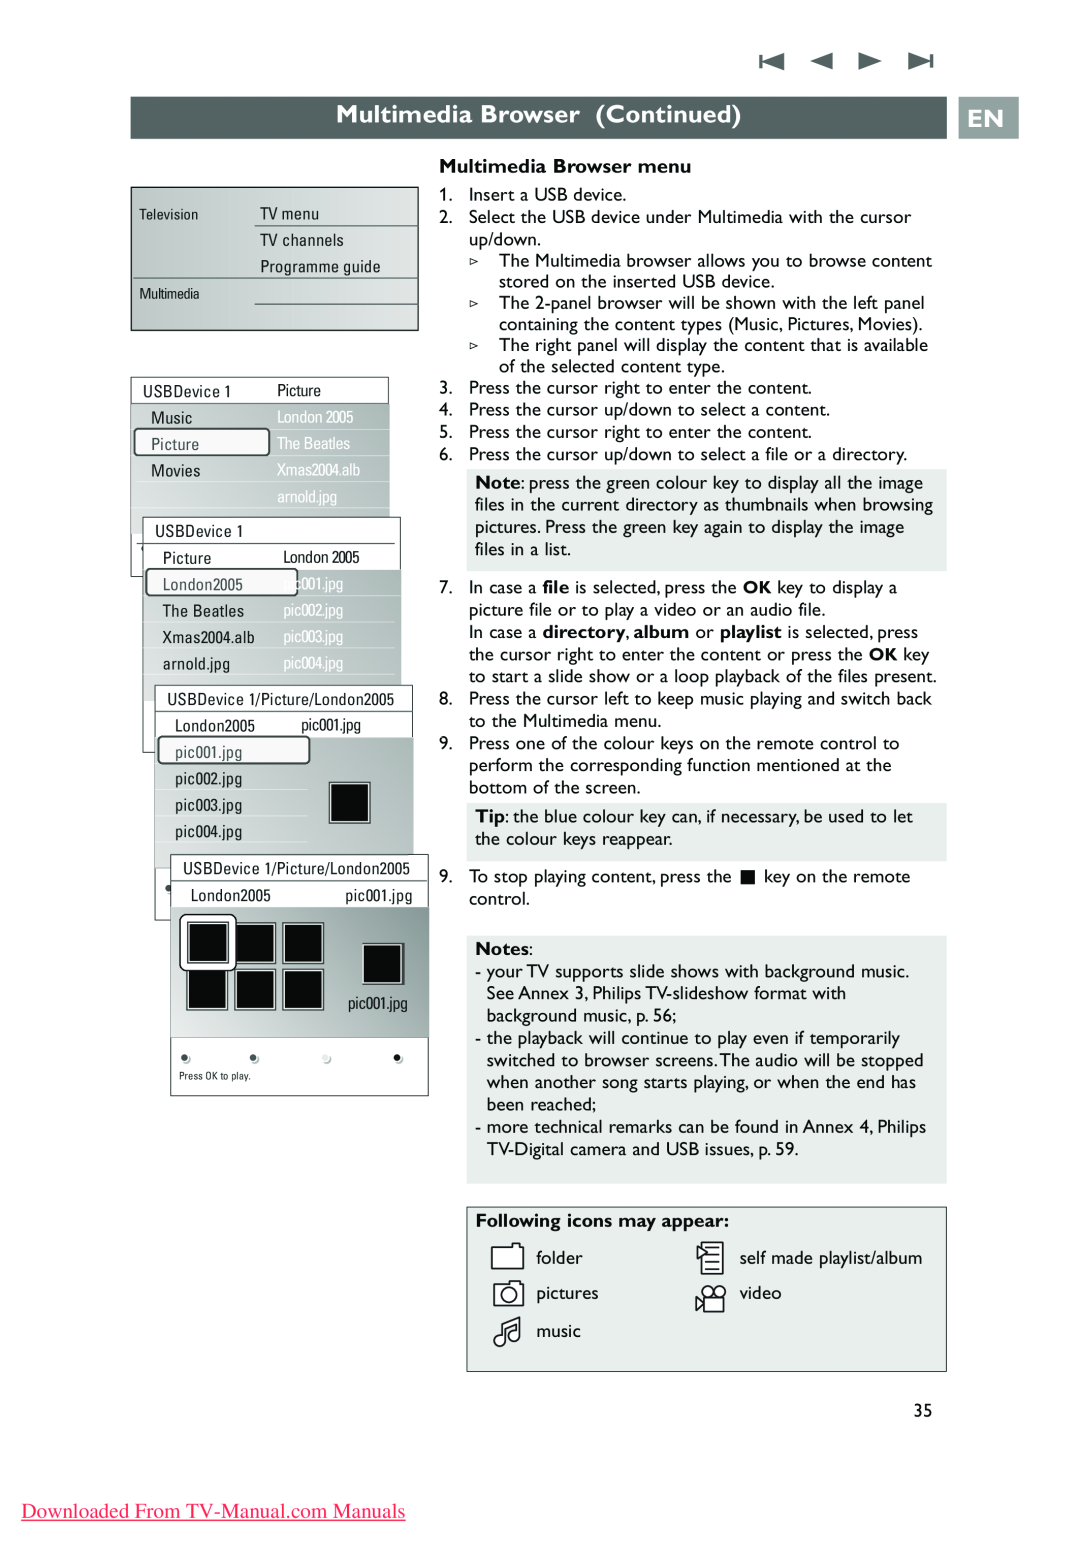 Philips 32PF9631D/10 instruction manual Multimedia Browser Continued, Multimedia Browser menu, Following icons may appear 